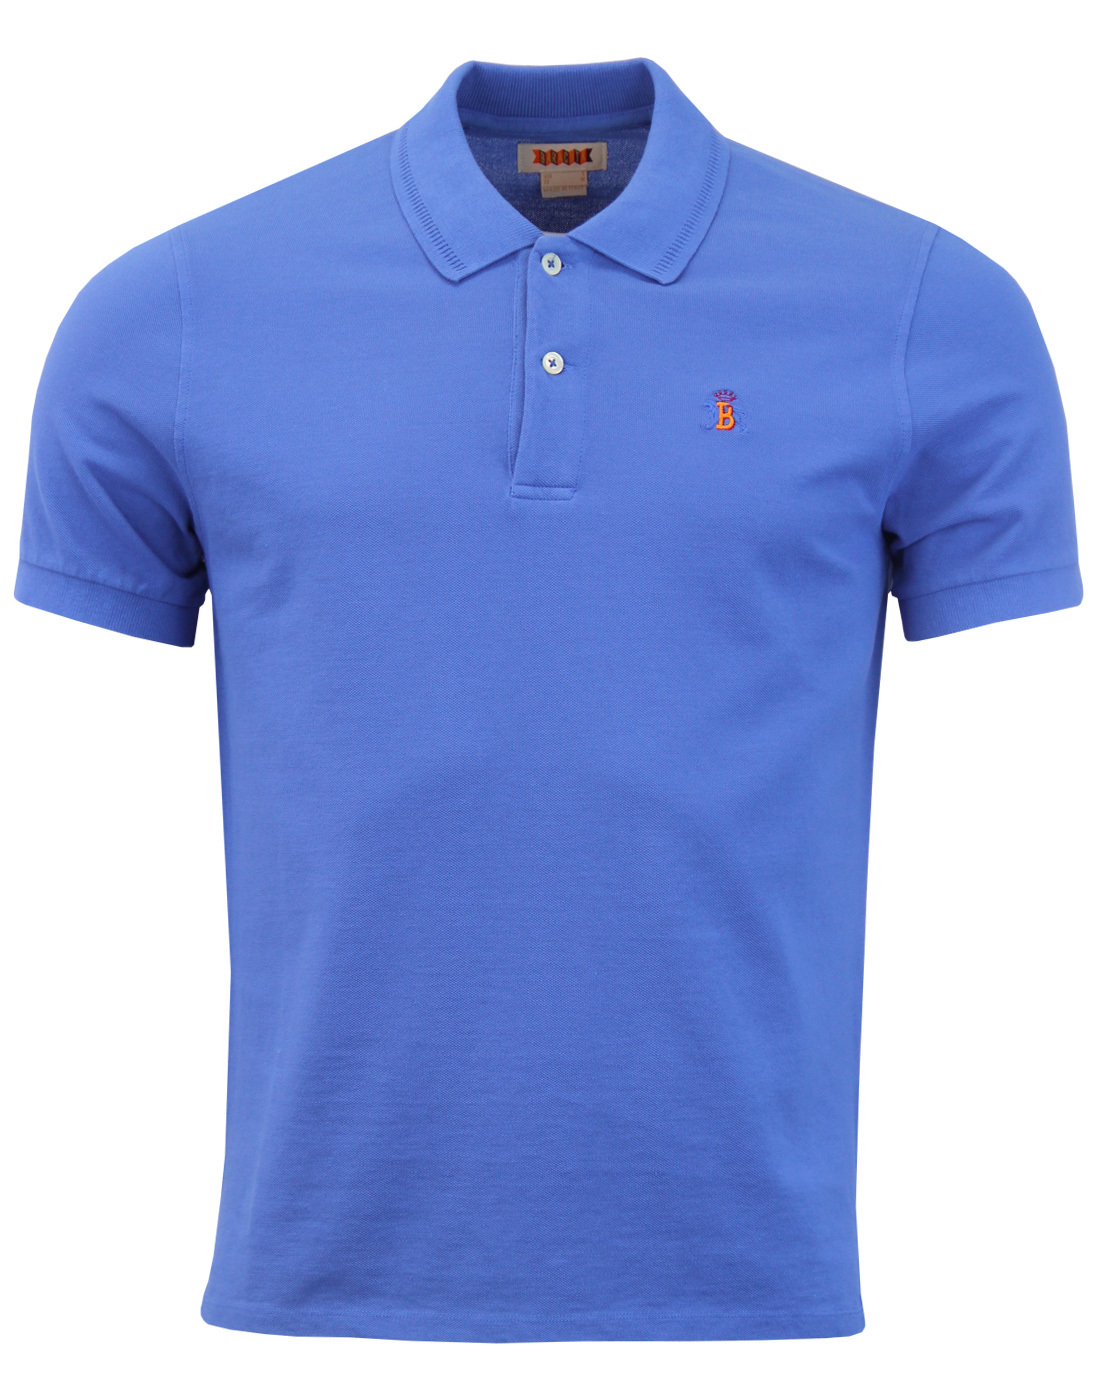 BARACUTA mens Made in Italy Branded Pique polo in Sapphire